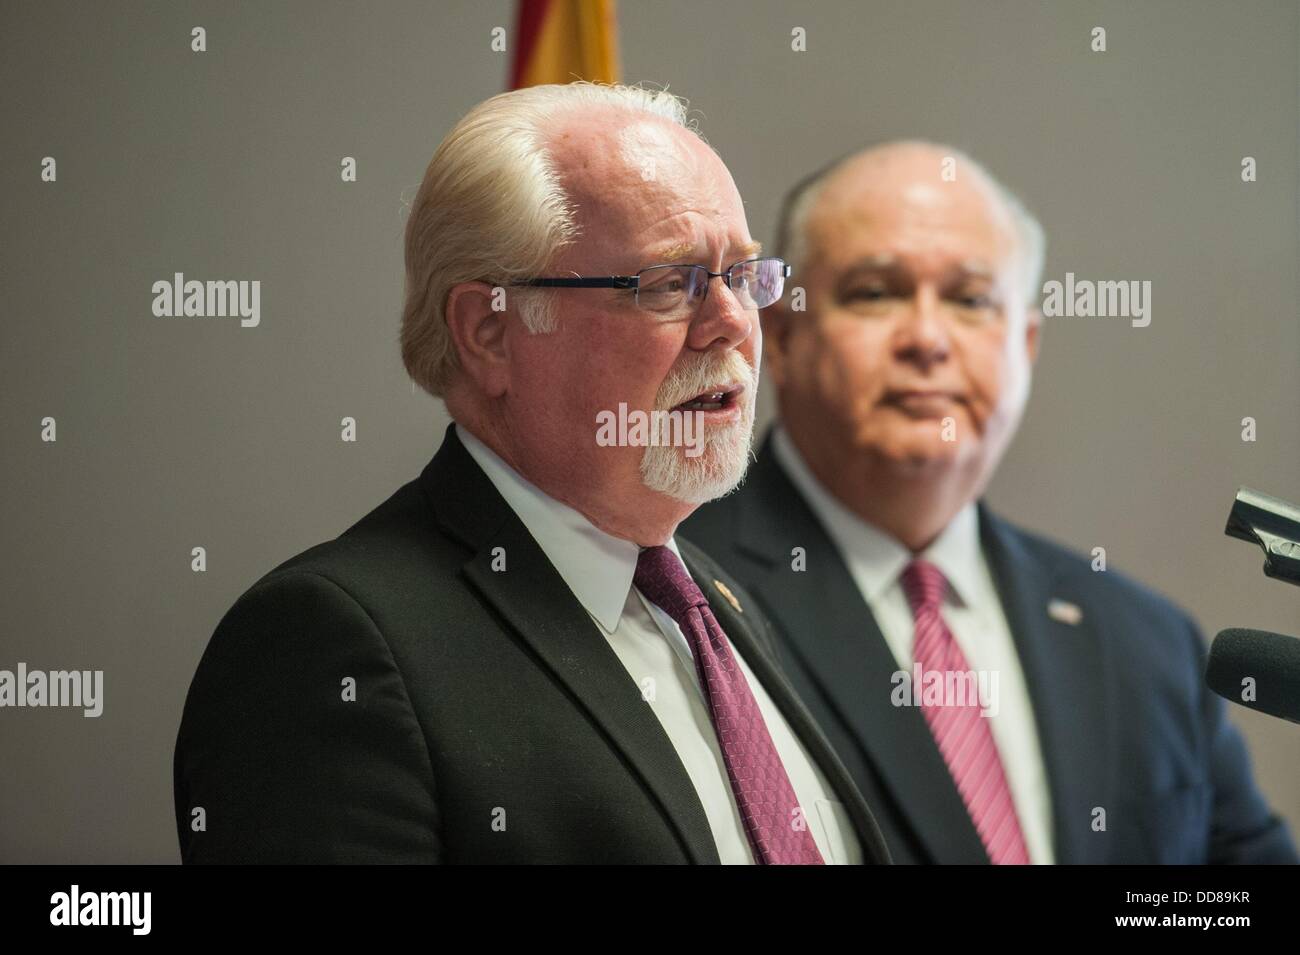 Tucson, Arizona, USA. 28th Aug, 2013. Under Secretary of the Army JOSEPH WESTPHAL, right, and Rep. RON BARBER (D-Ariz.), left, are in Barber's Southern Arizona district to tour military facilities and defense contractor plants. The men held a press conference at Tucson International Airport in Tucson, Ariz. after Westphal's arrival. Barber said he is leading Westphal's tour to make sure Westphal has an understanding of the importance of the military in Barber's district. Westphal said at this point there are no Administration plans for base realignment and closure programs becaus Stock Photo